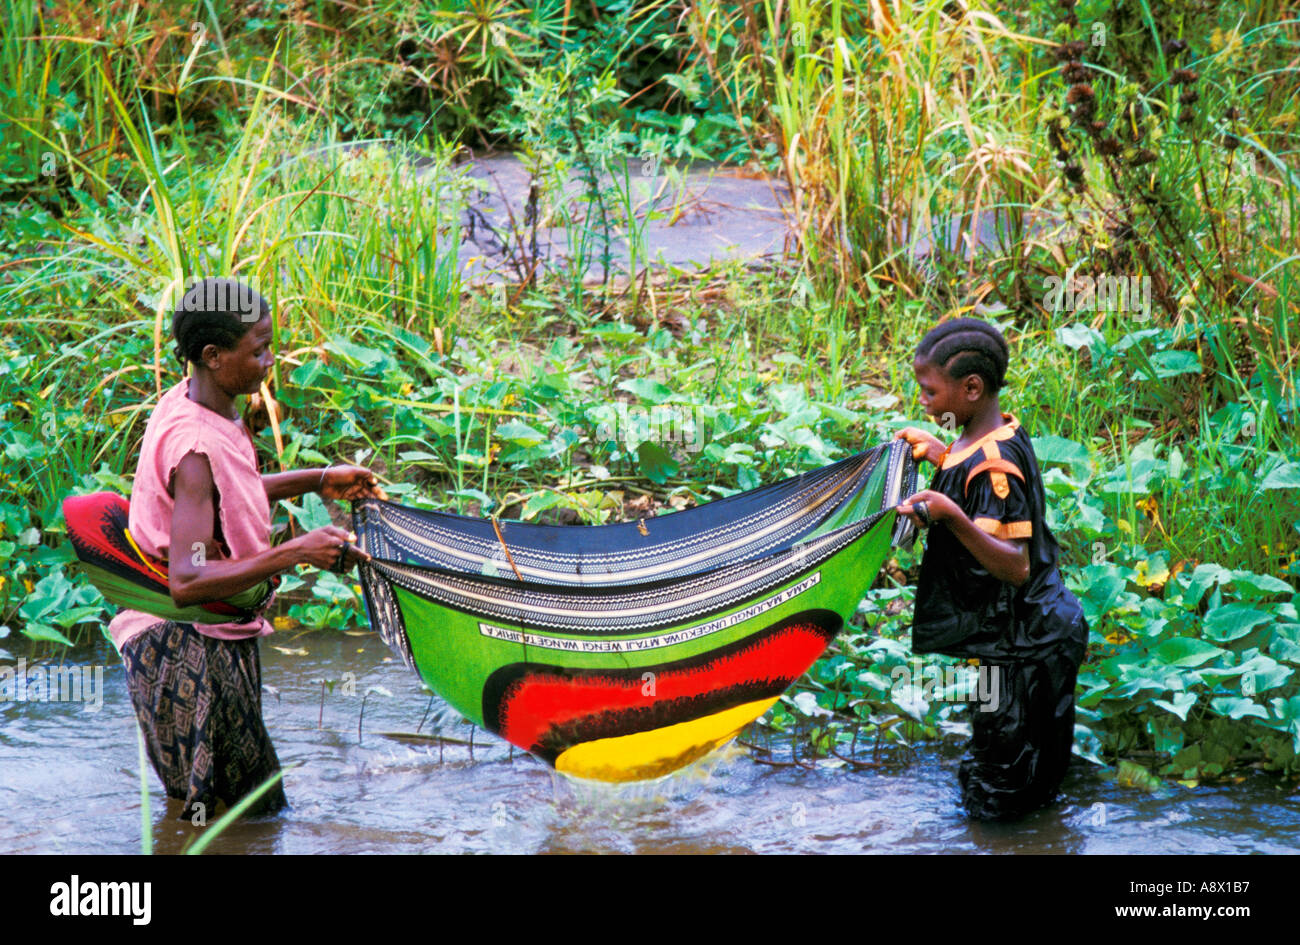 Africa KENYA Malindi Kenyan mother and daughter use a traditional kanga cloth as a net to capture fish in the river Stock Photo